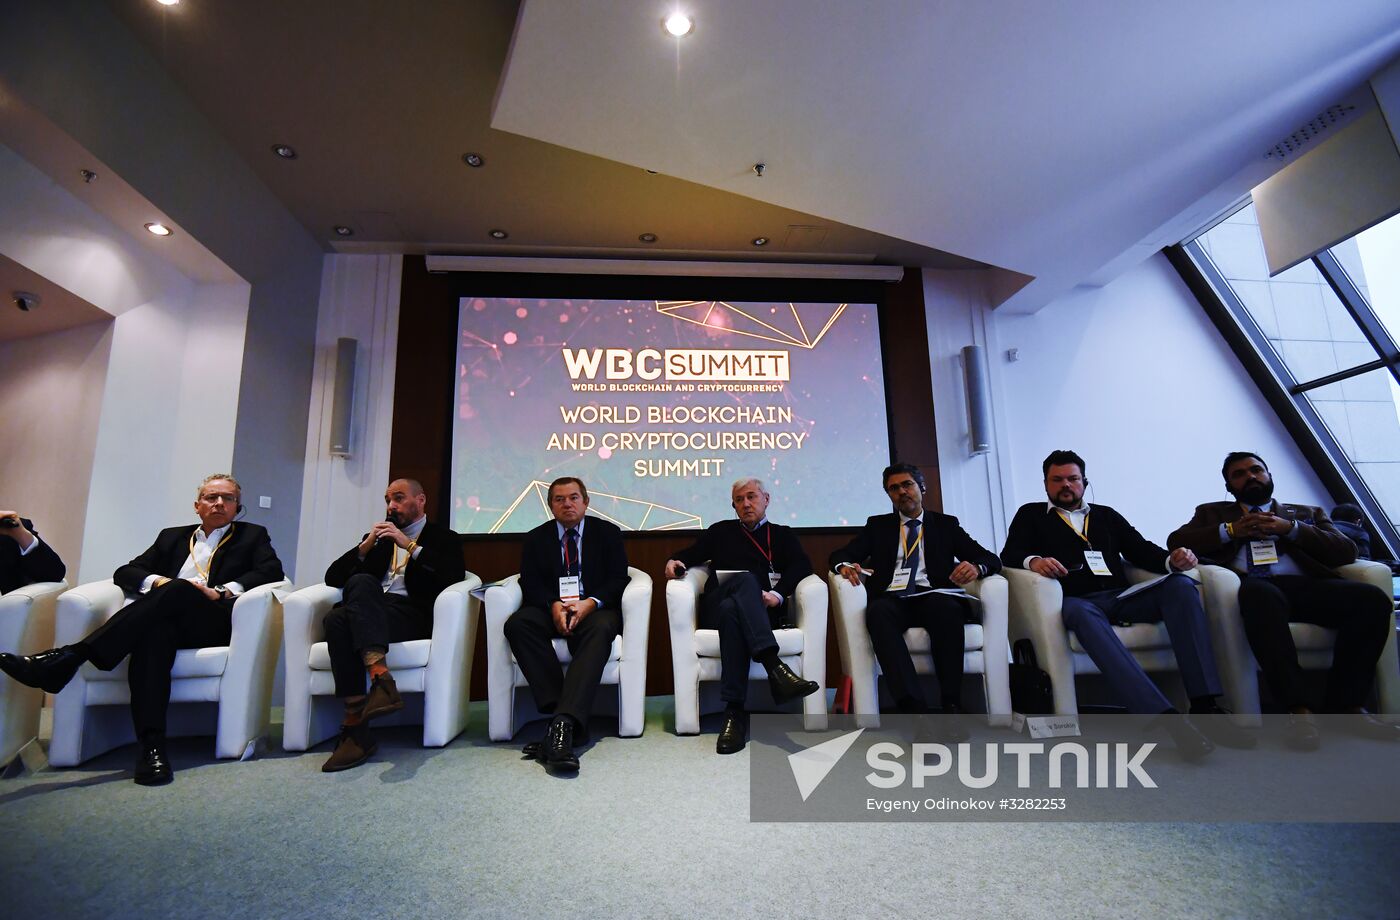 World Blockchain and Cryptocurrency Summit